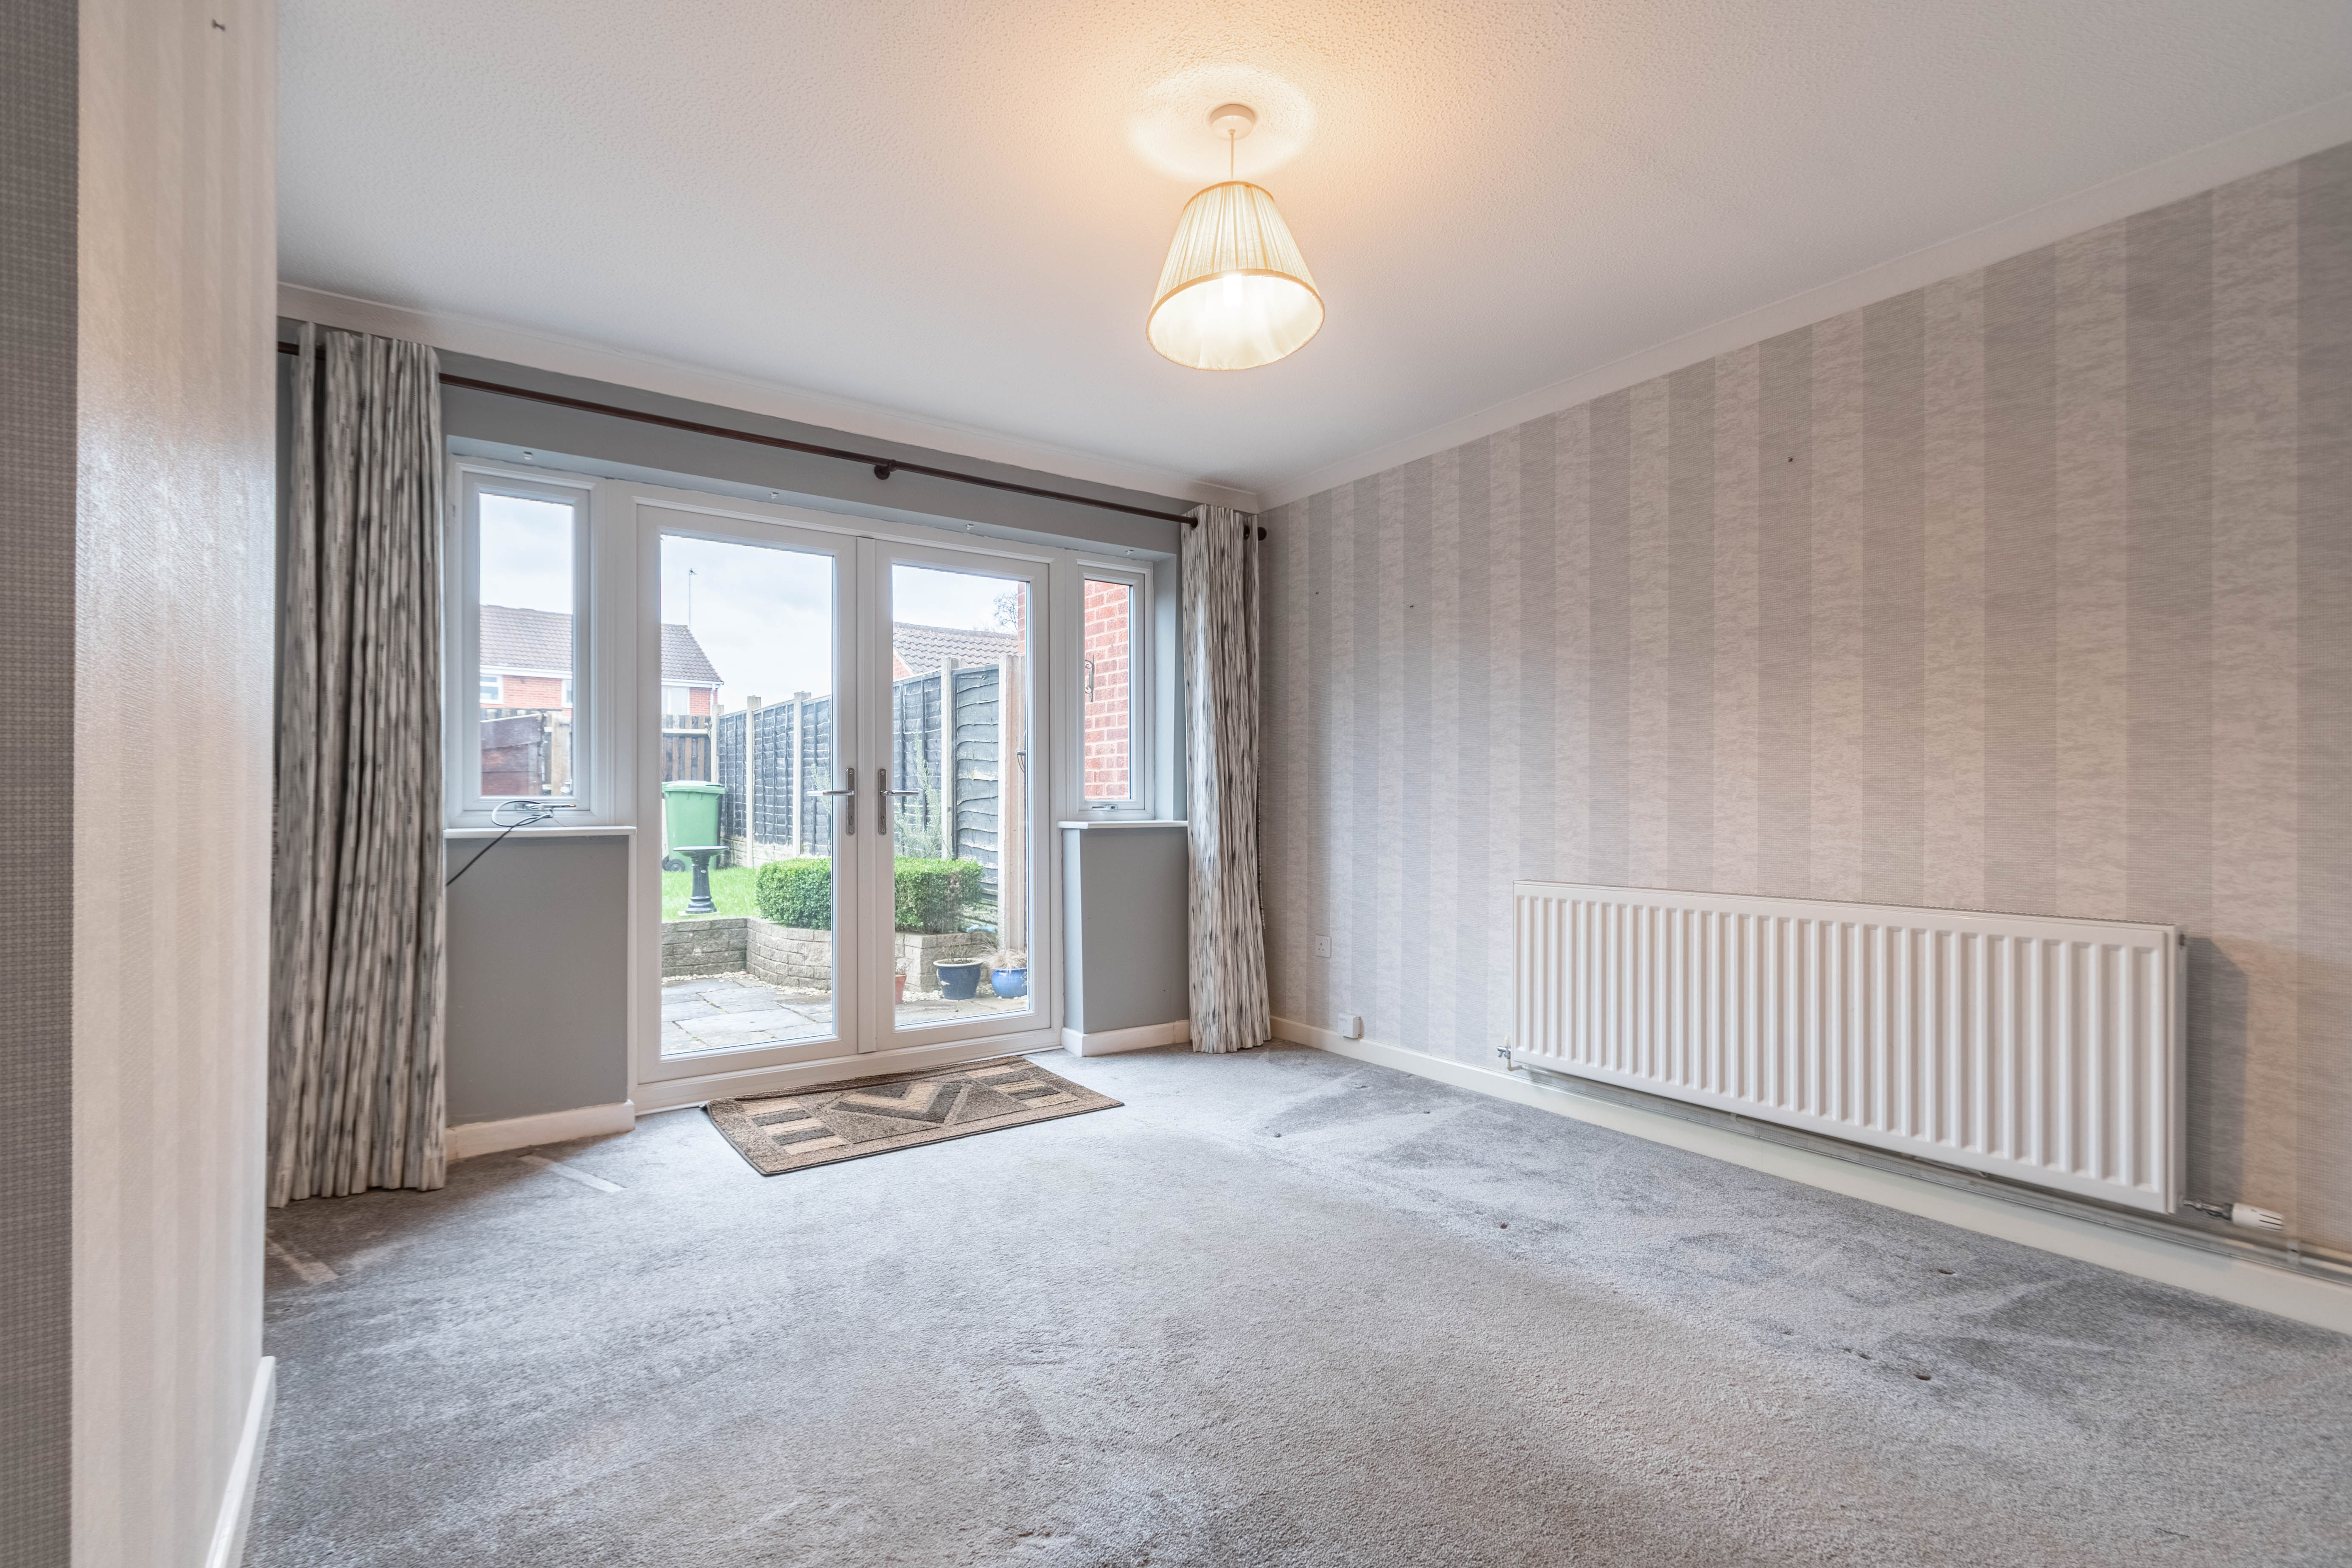 2 bed house for sale in Abbotswood Close, Winyates Green  - Property Image 6